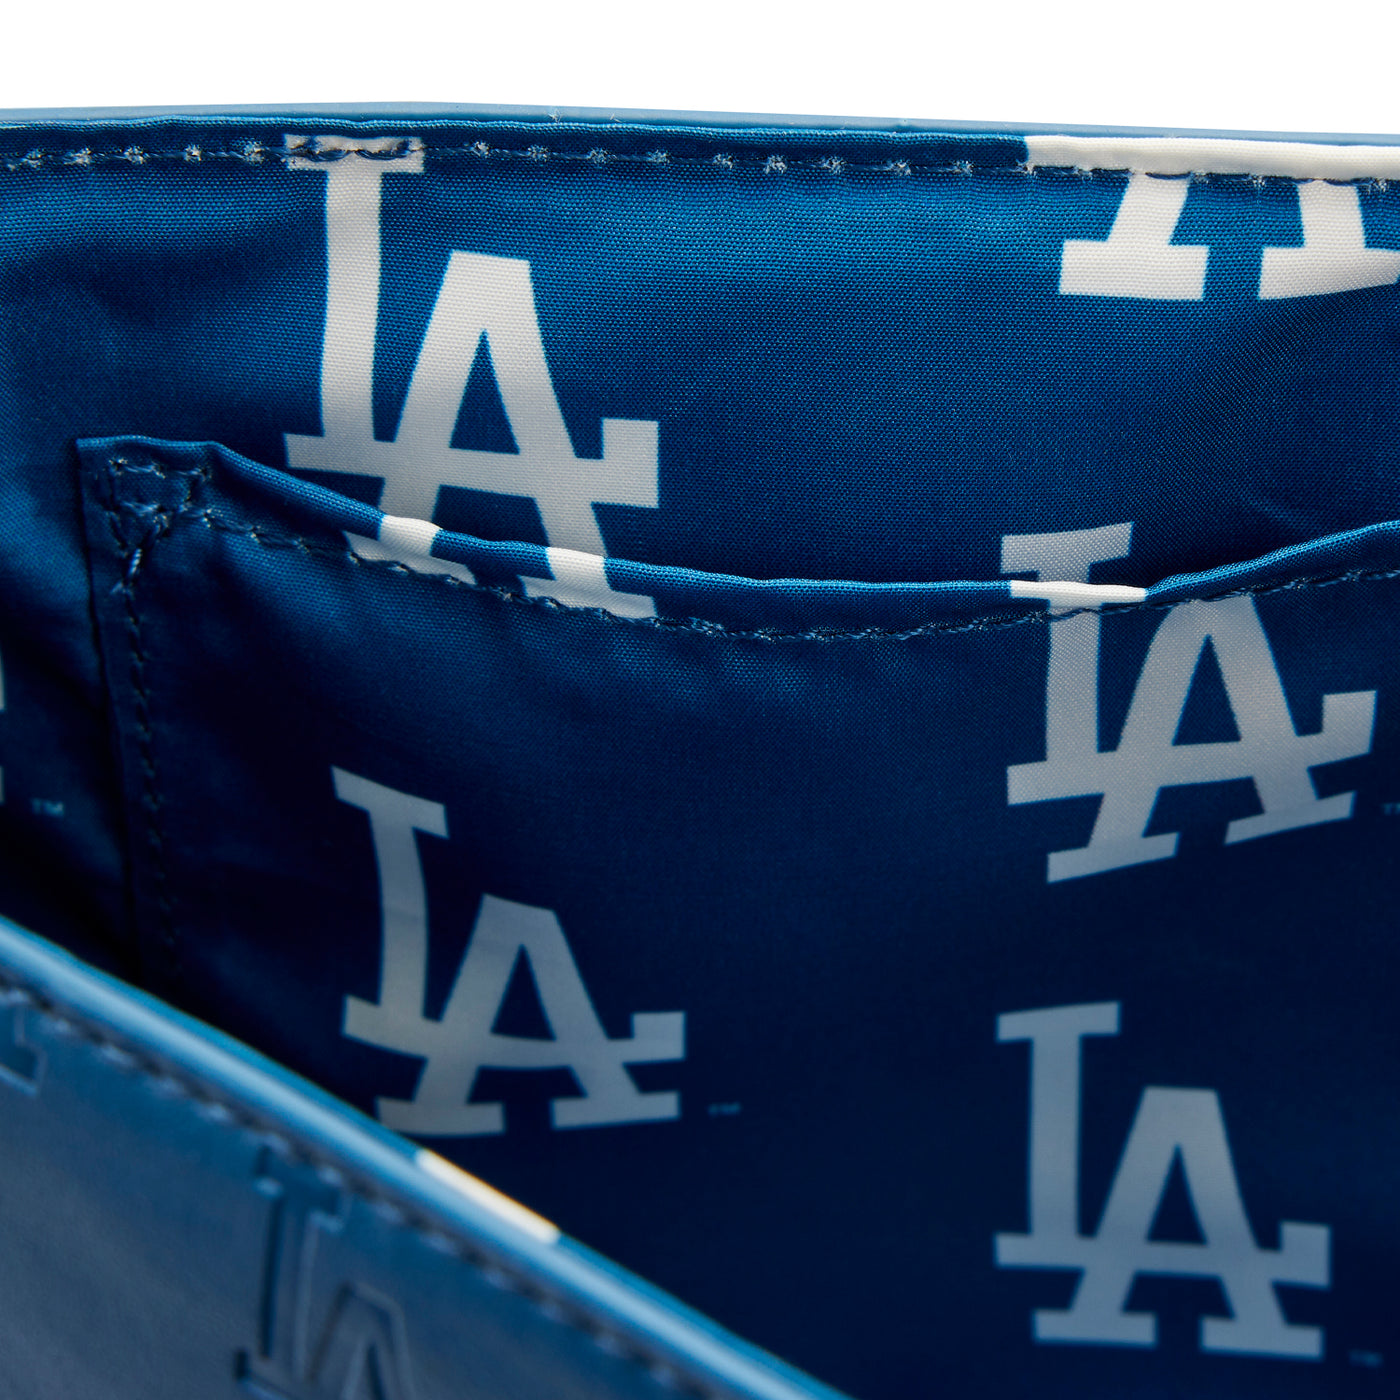 Loungefly MLB Los Angeles Dodgers Patches Crossbody